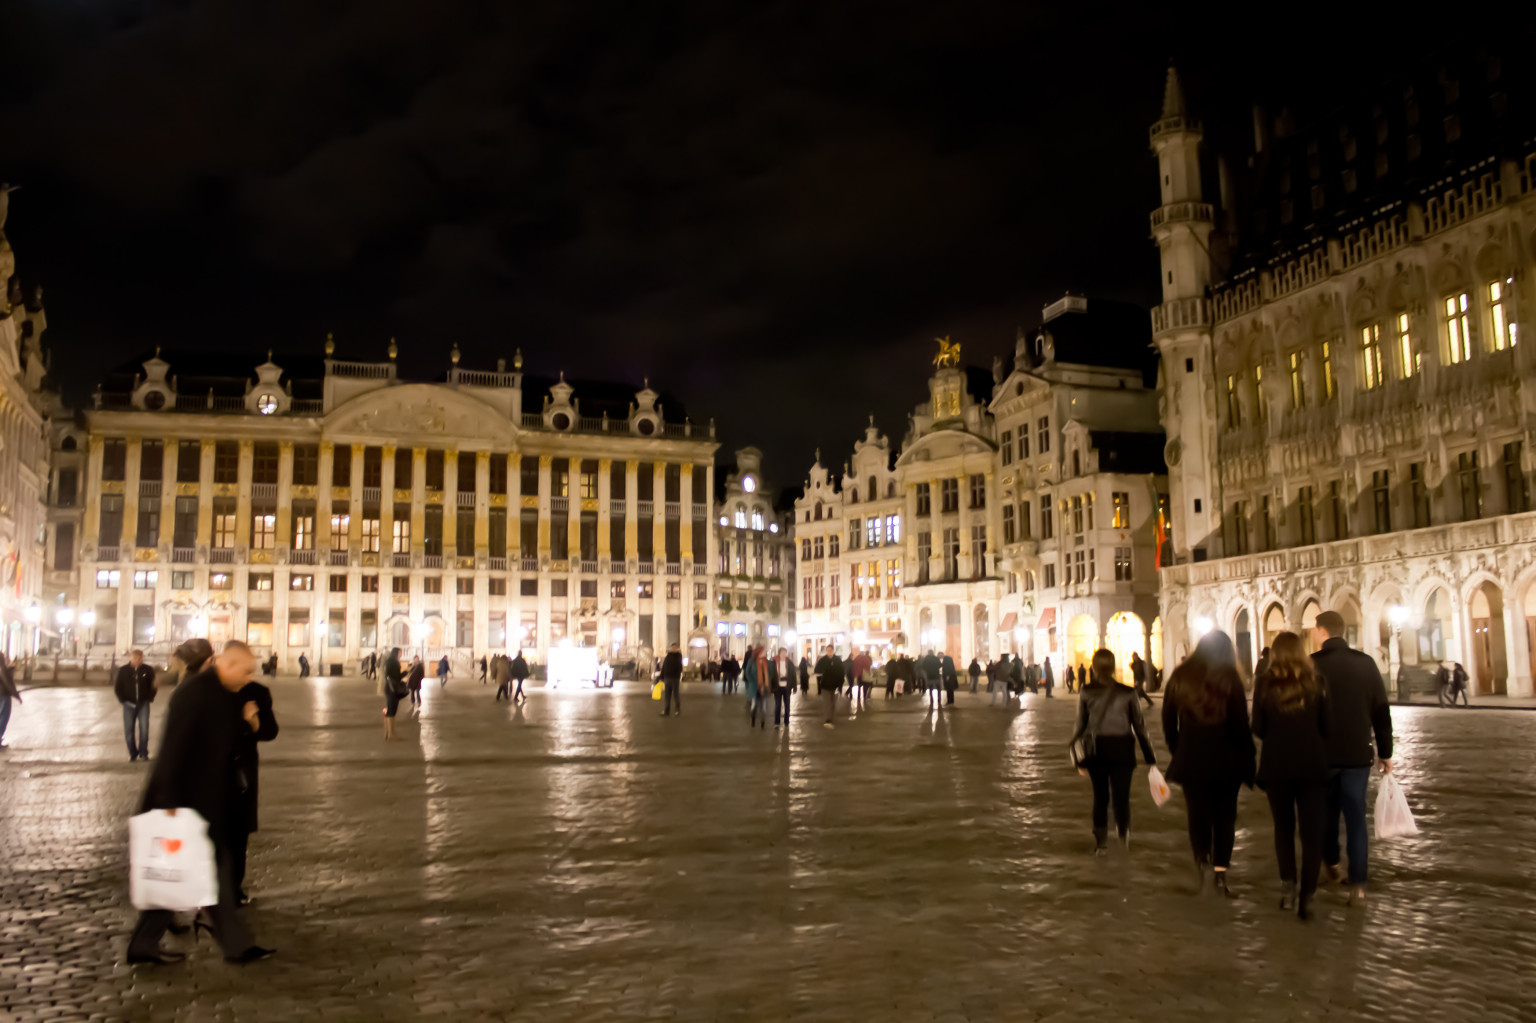 A look across the Grand Place after dark